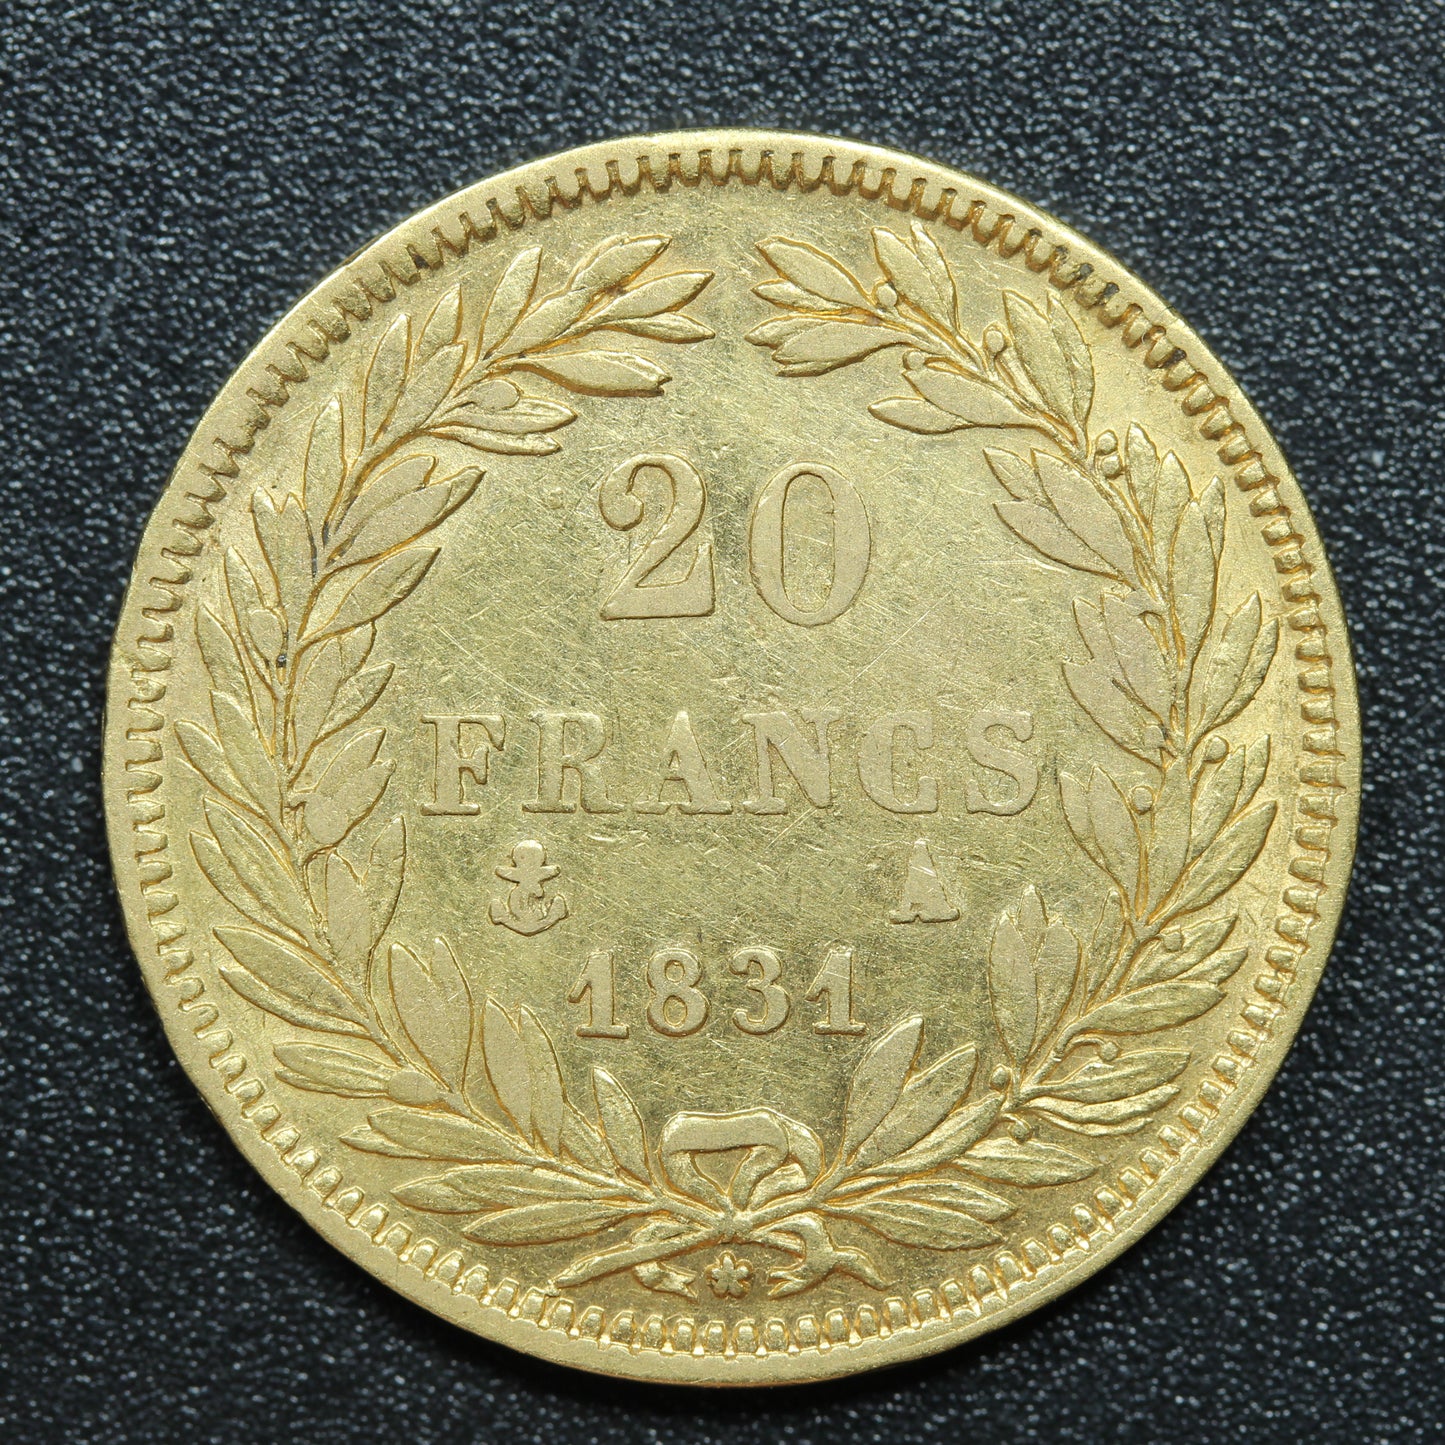 1831 A French Gold 20 Francs LOUIS PHILIPPE - KM# 739.1